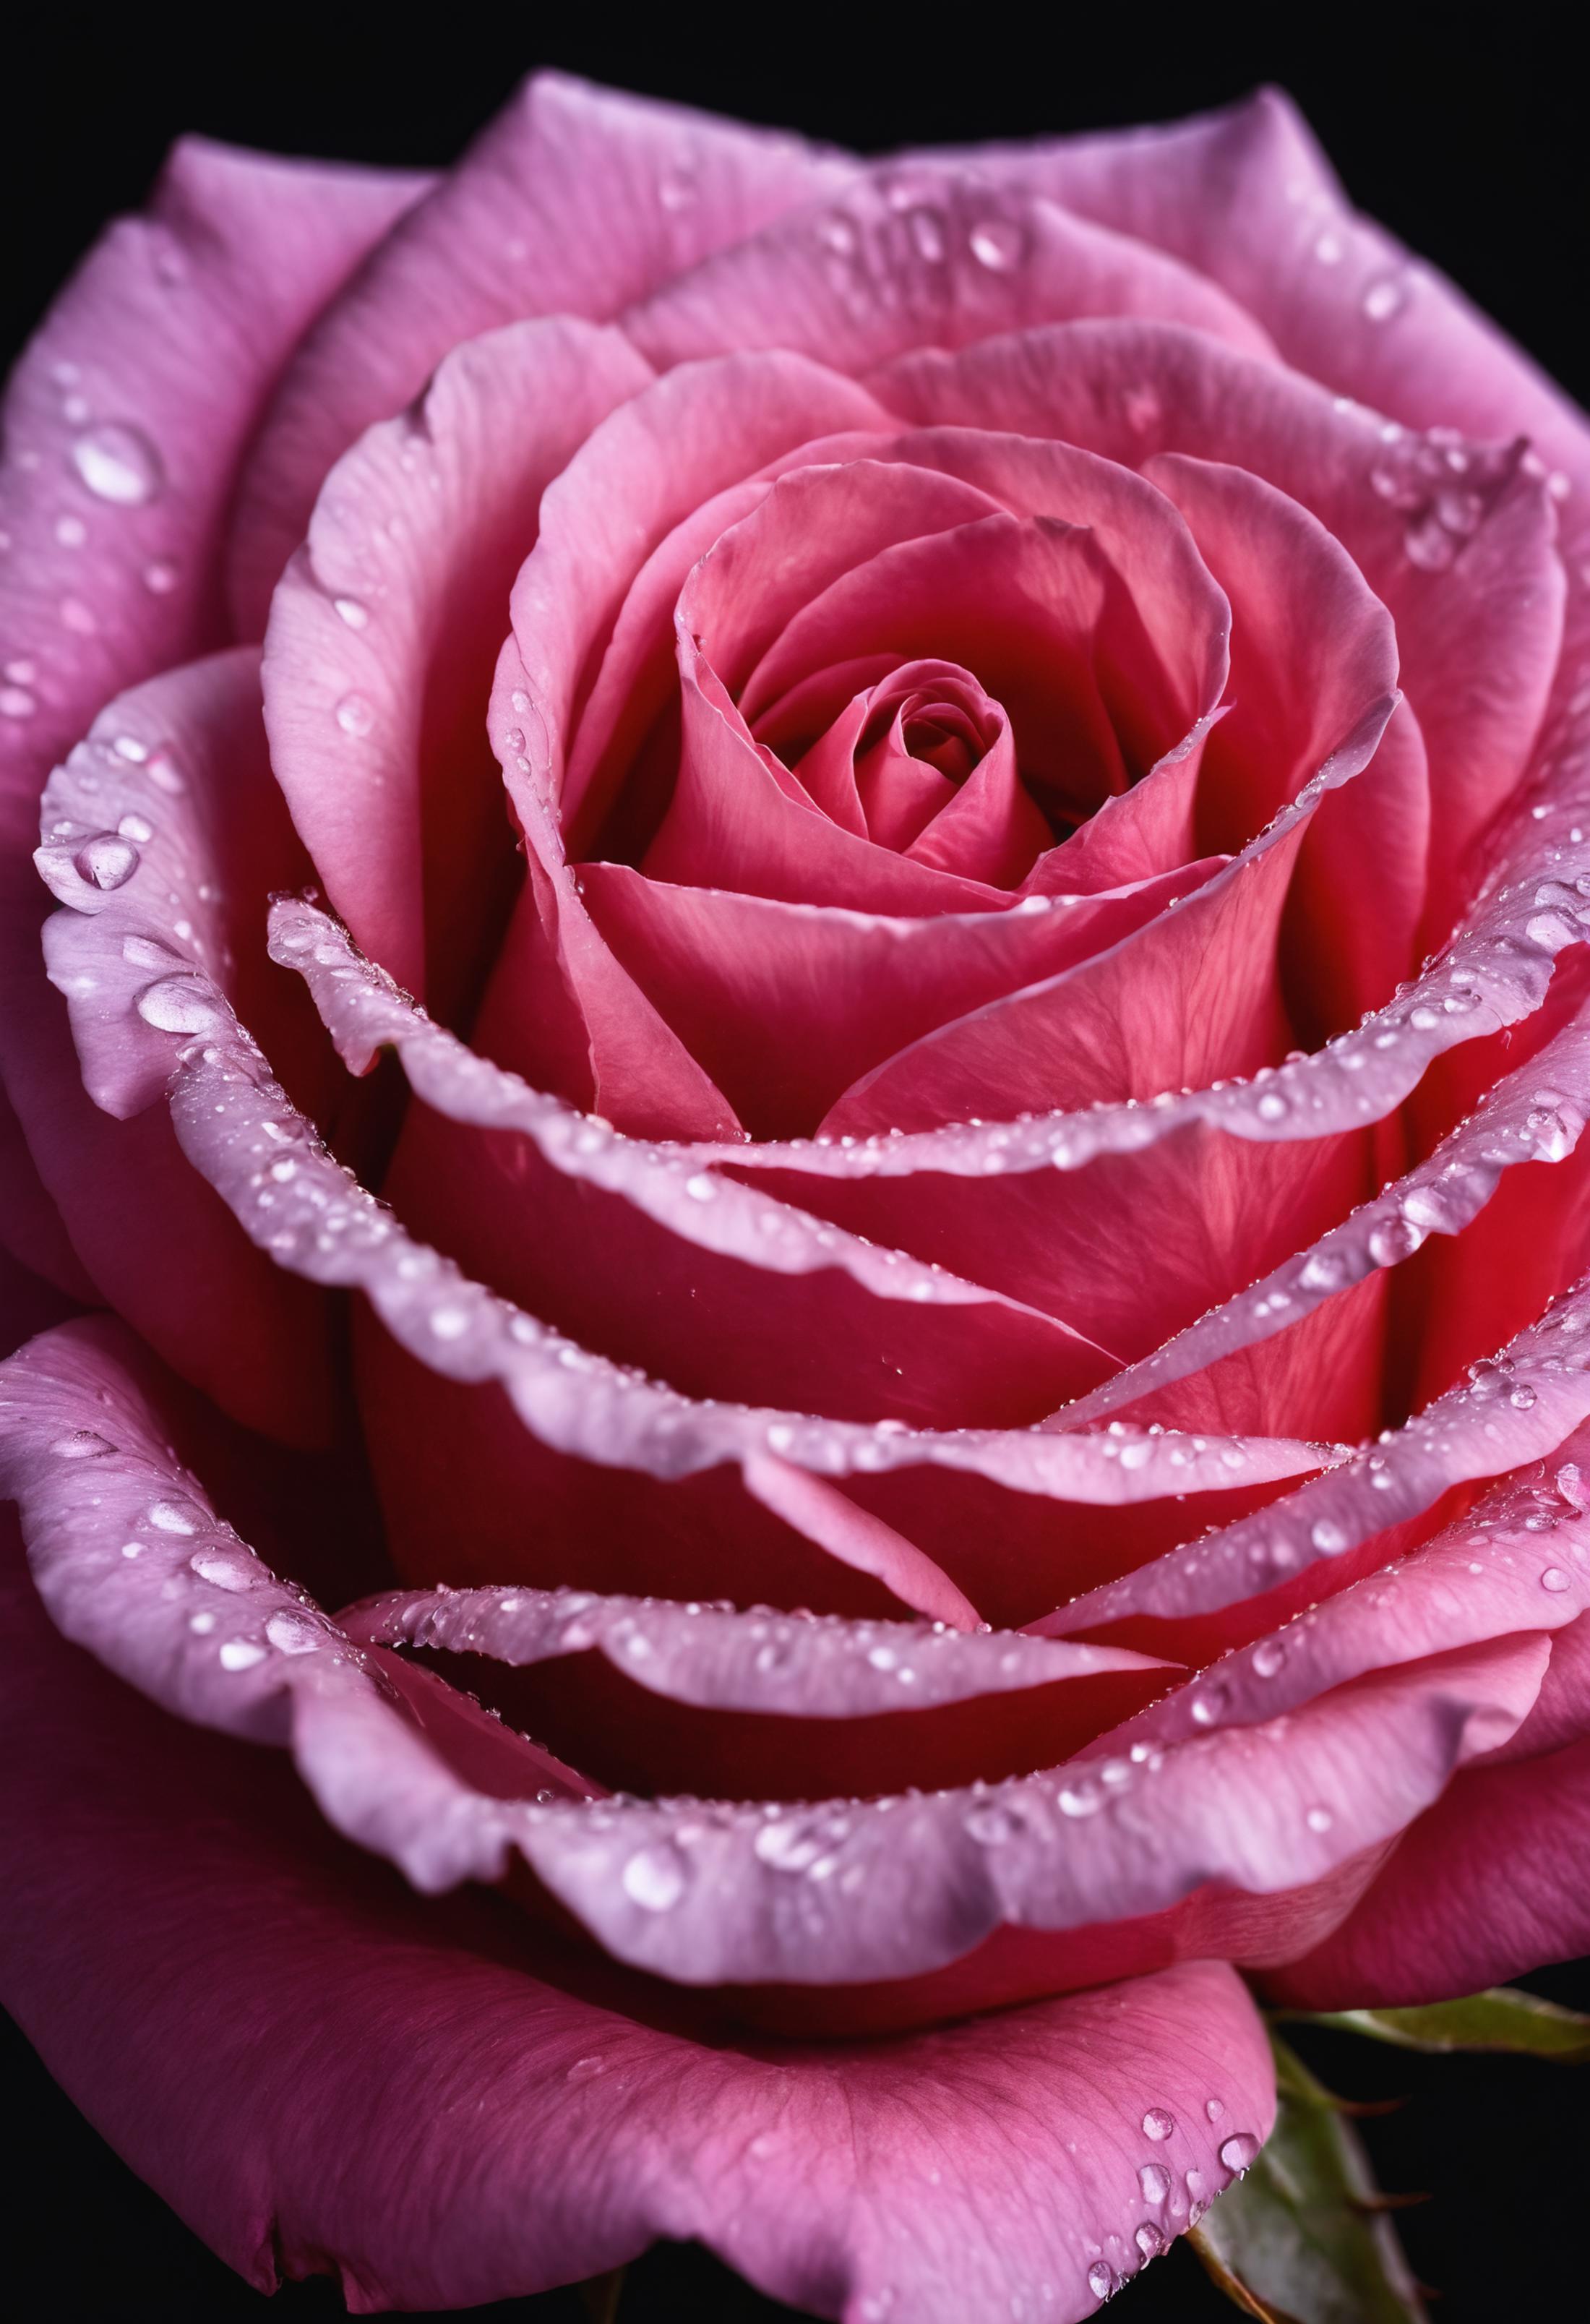 Pink Rose Petals with Water Droplets on Them